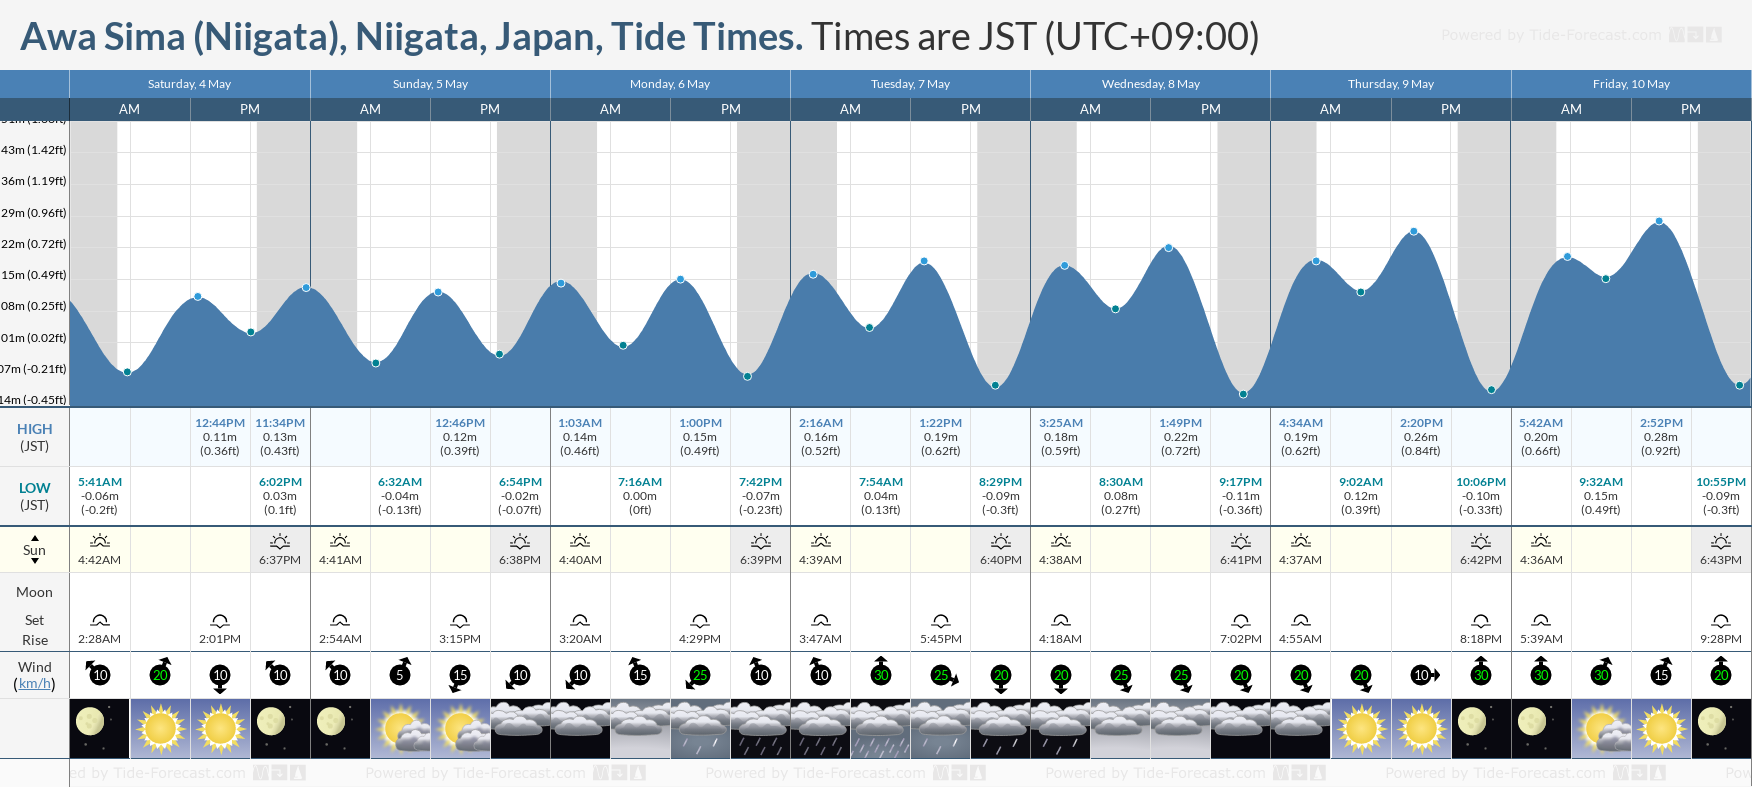 Awa Sima (Niigata), Niigata, Japan Tide Chart including high and low tide tide times for the next 7 days